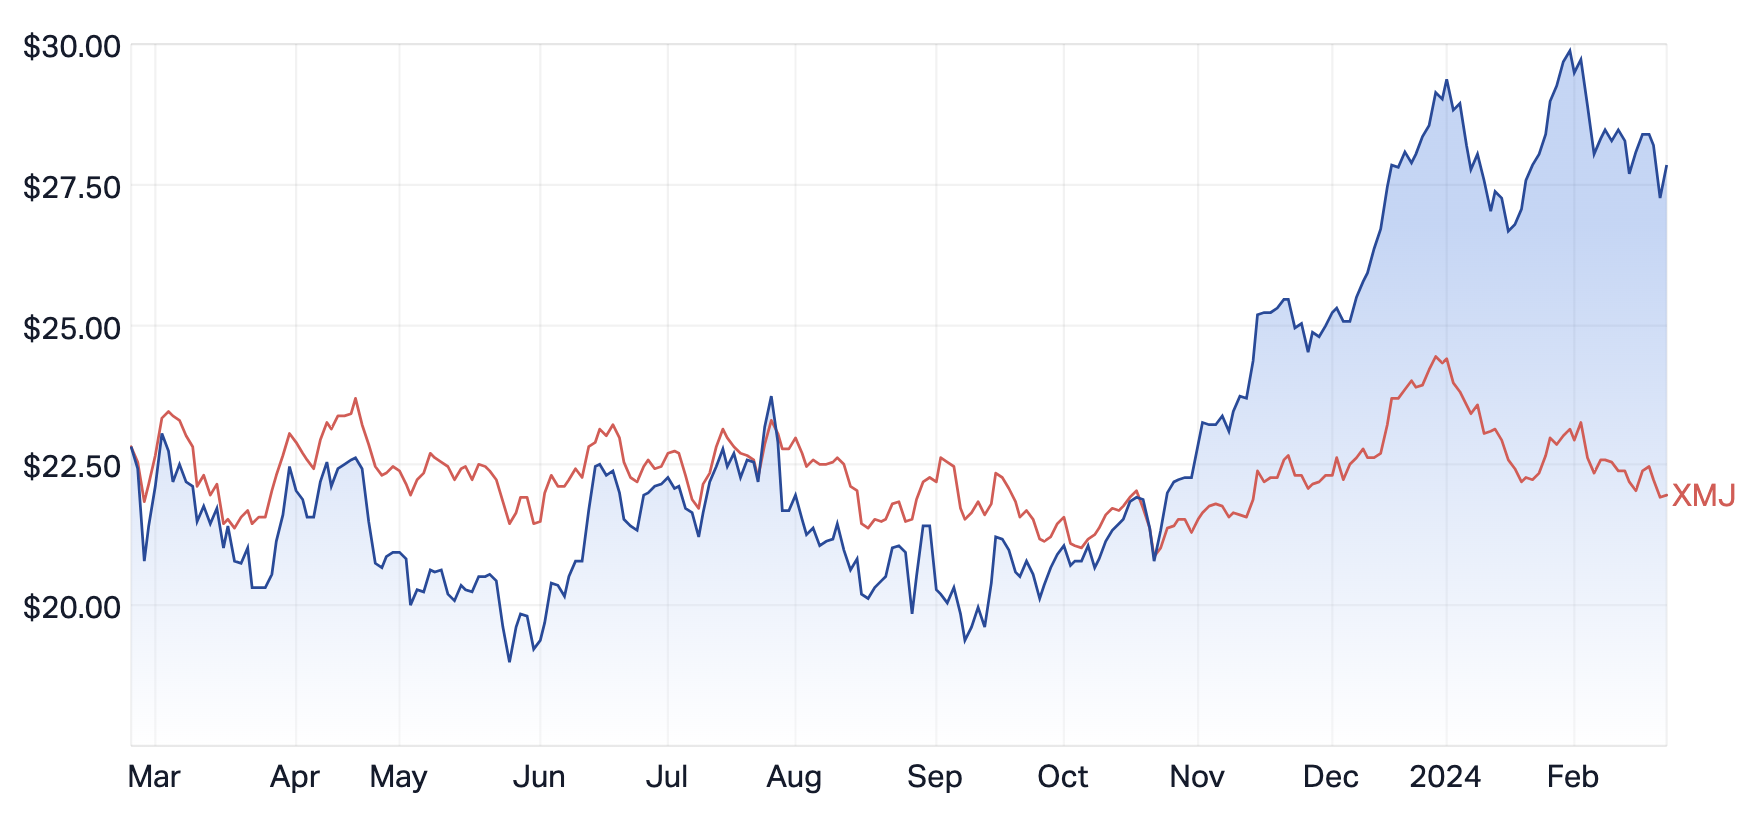 Fortescue 1-yr share price performance vs the S&P/ASX 200 Materials Index (Source: Market Index)